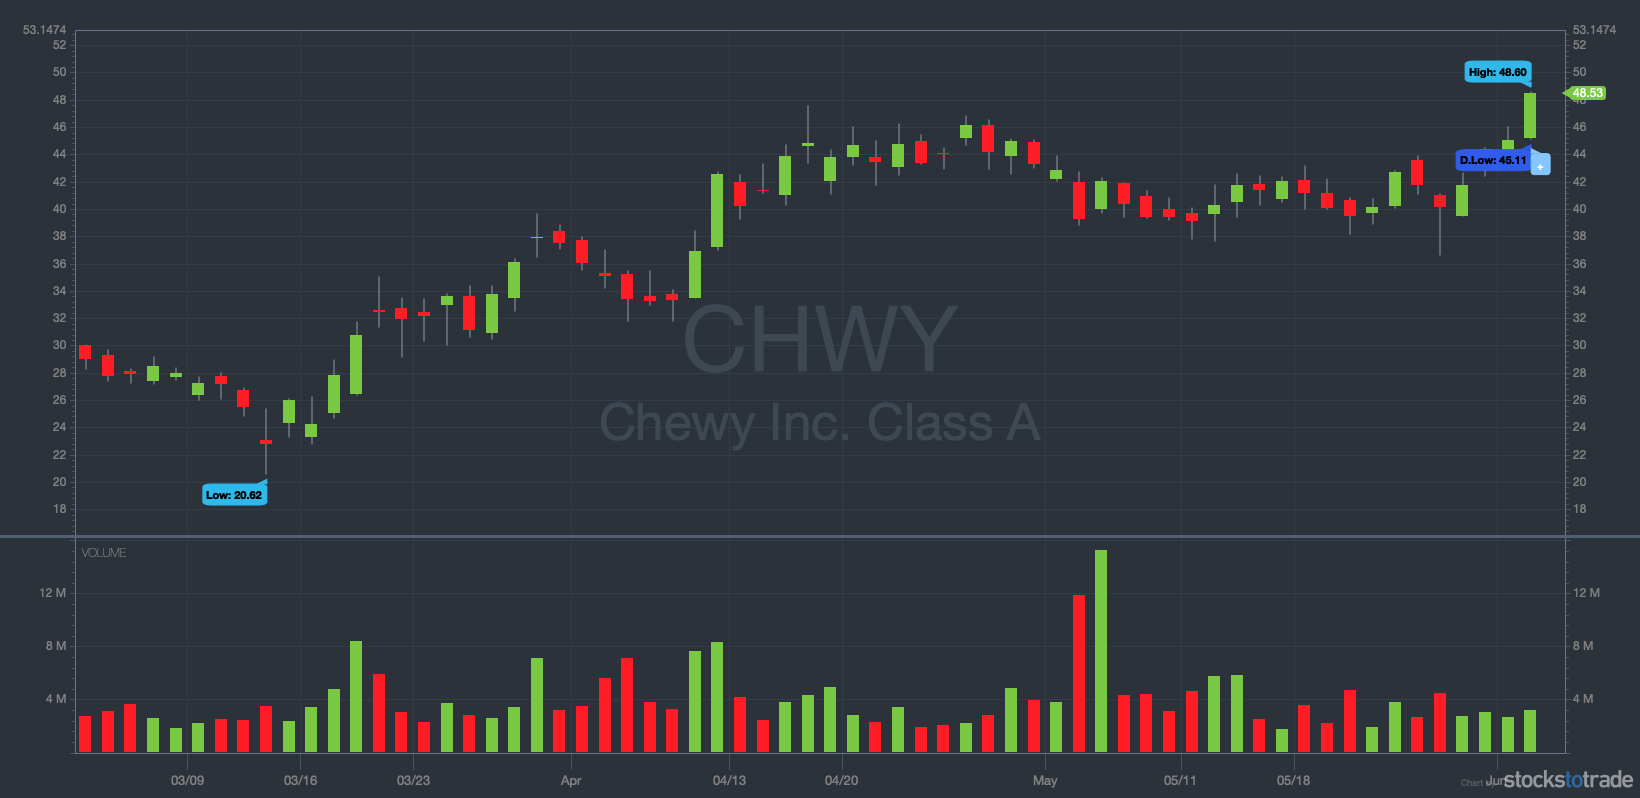 pandemic swing trades CHWY 3 month